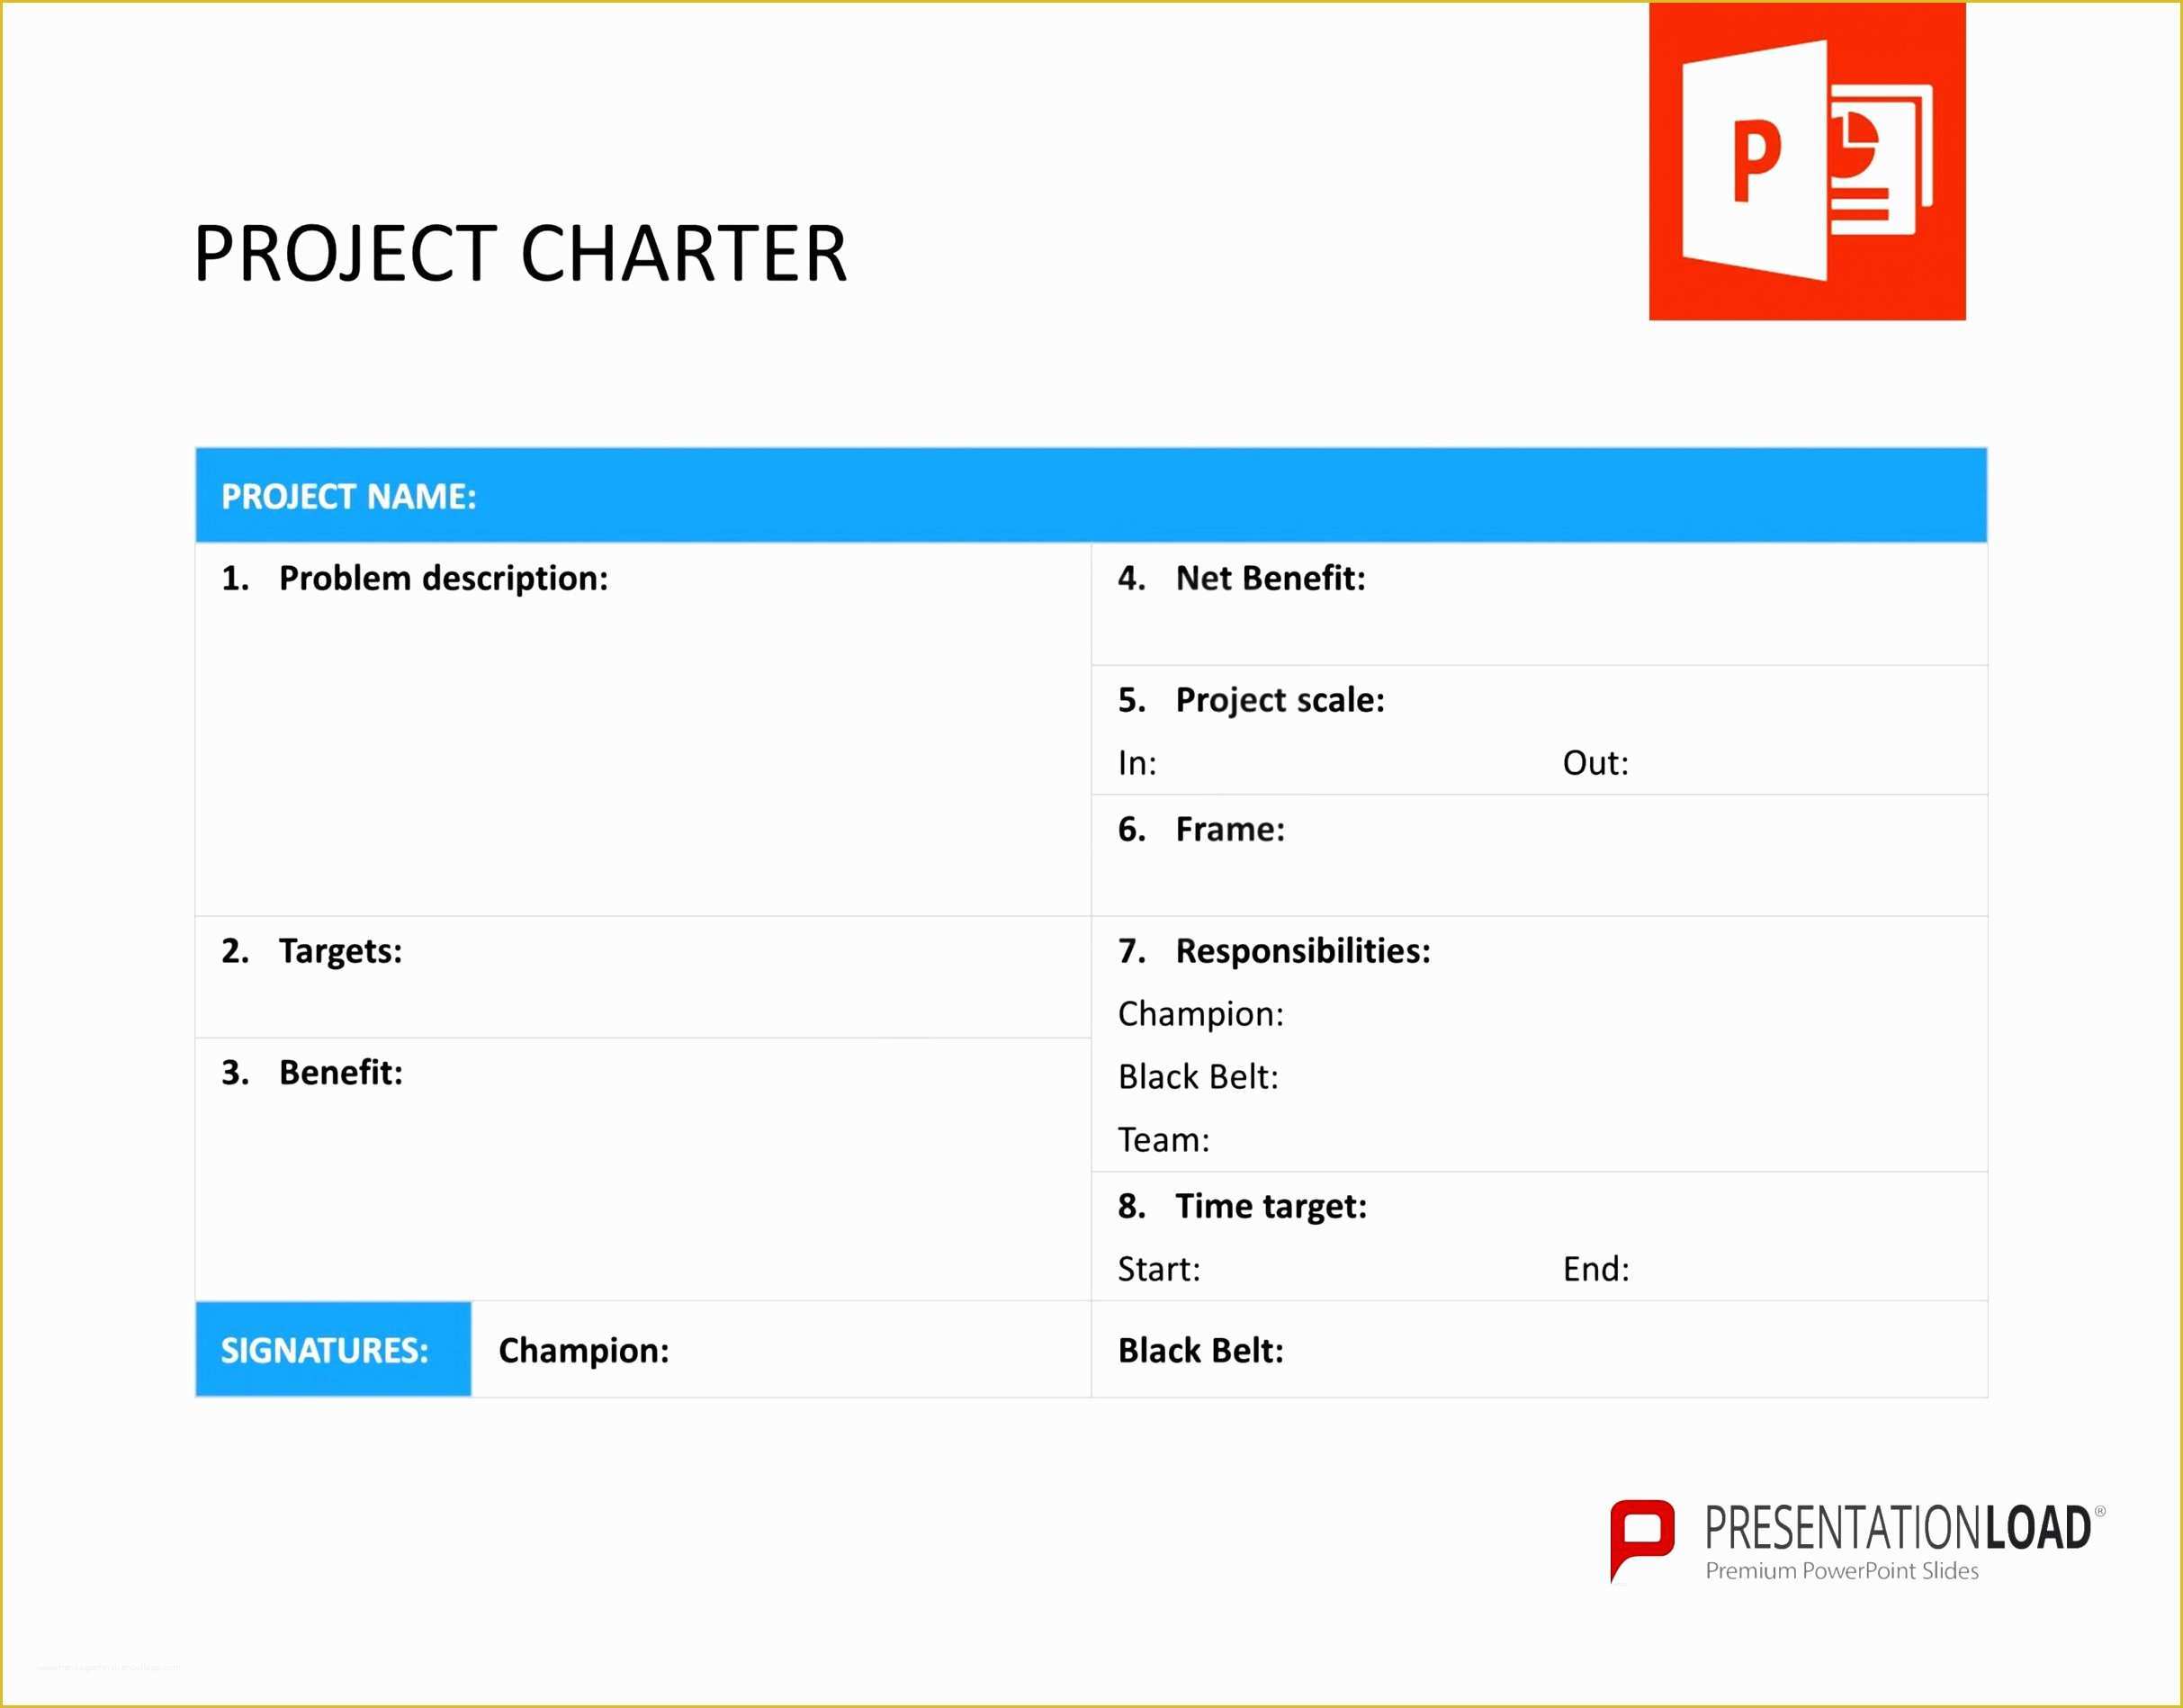 Project Charter Template Excel Free Of Six Sigma Project Charter Template Excel Ualyl Lovely